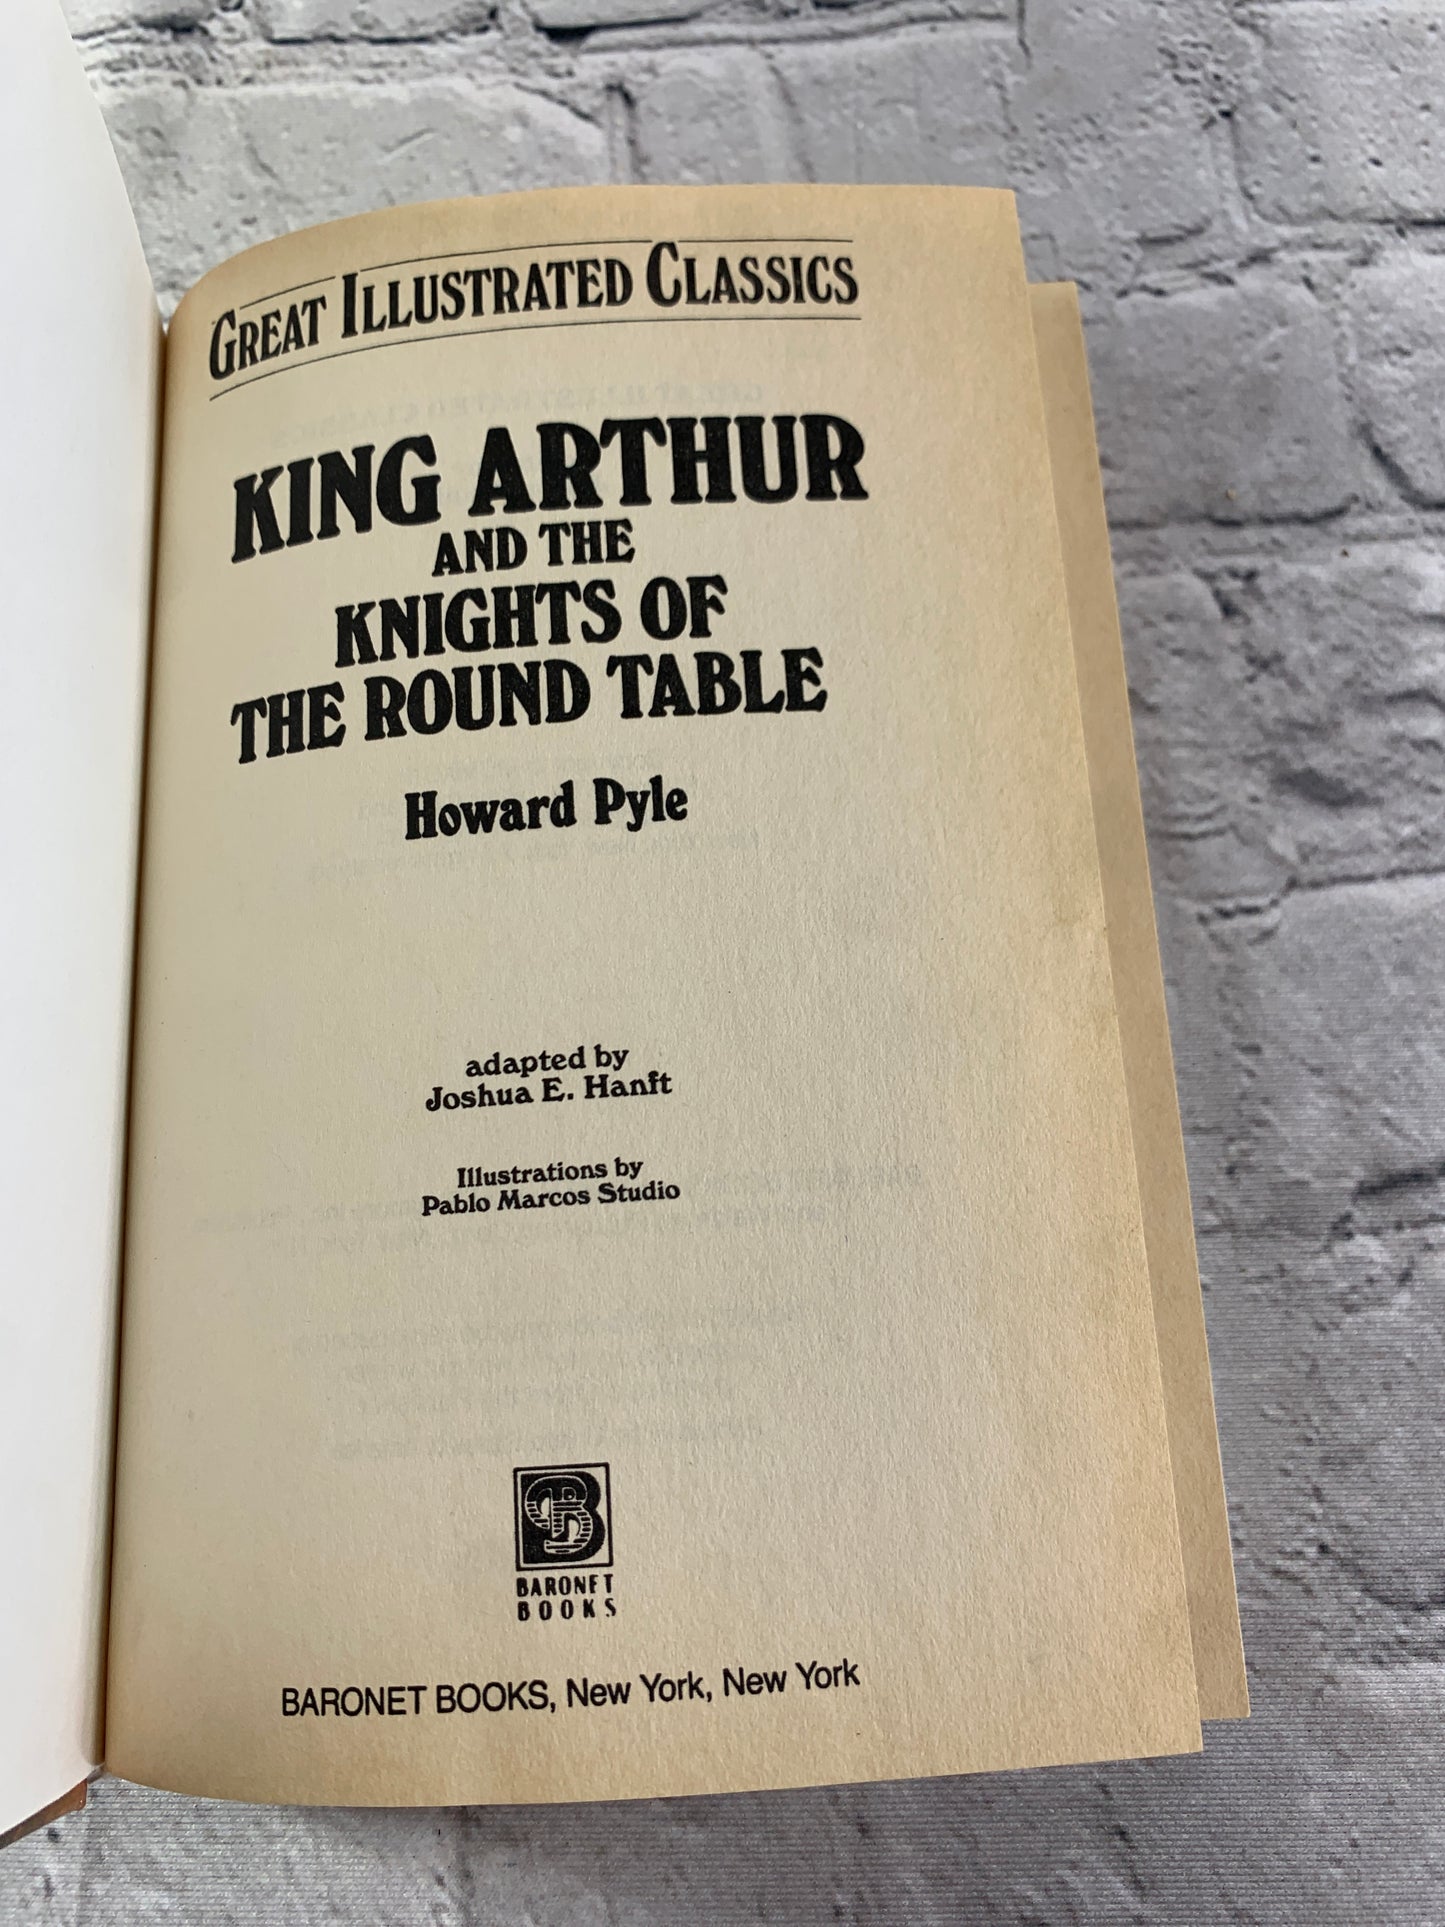 King Arthur and the Knights of the Round Table by Howard Pyle [Great Illustrated Classics · 1997]